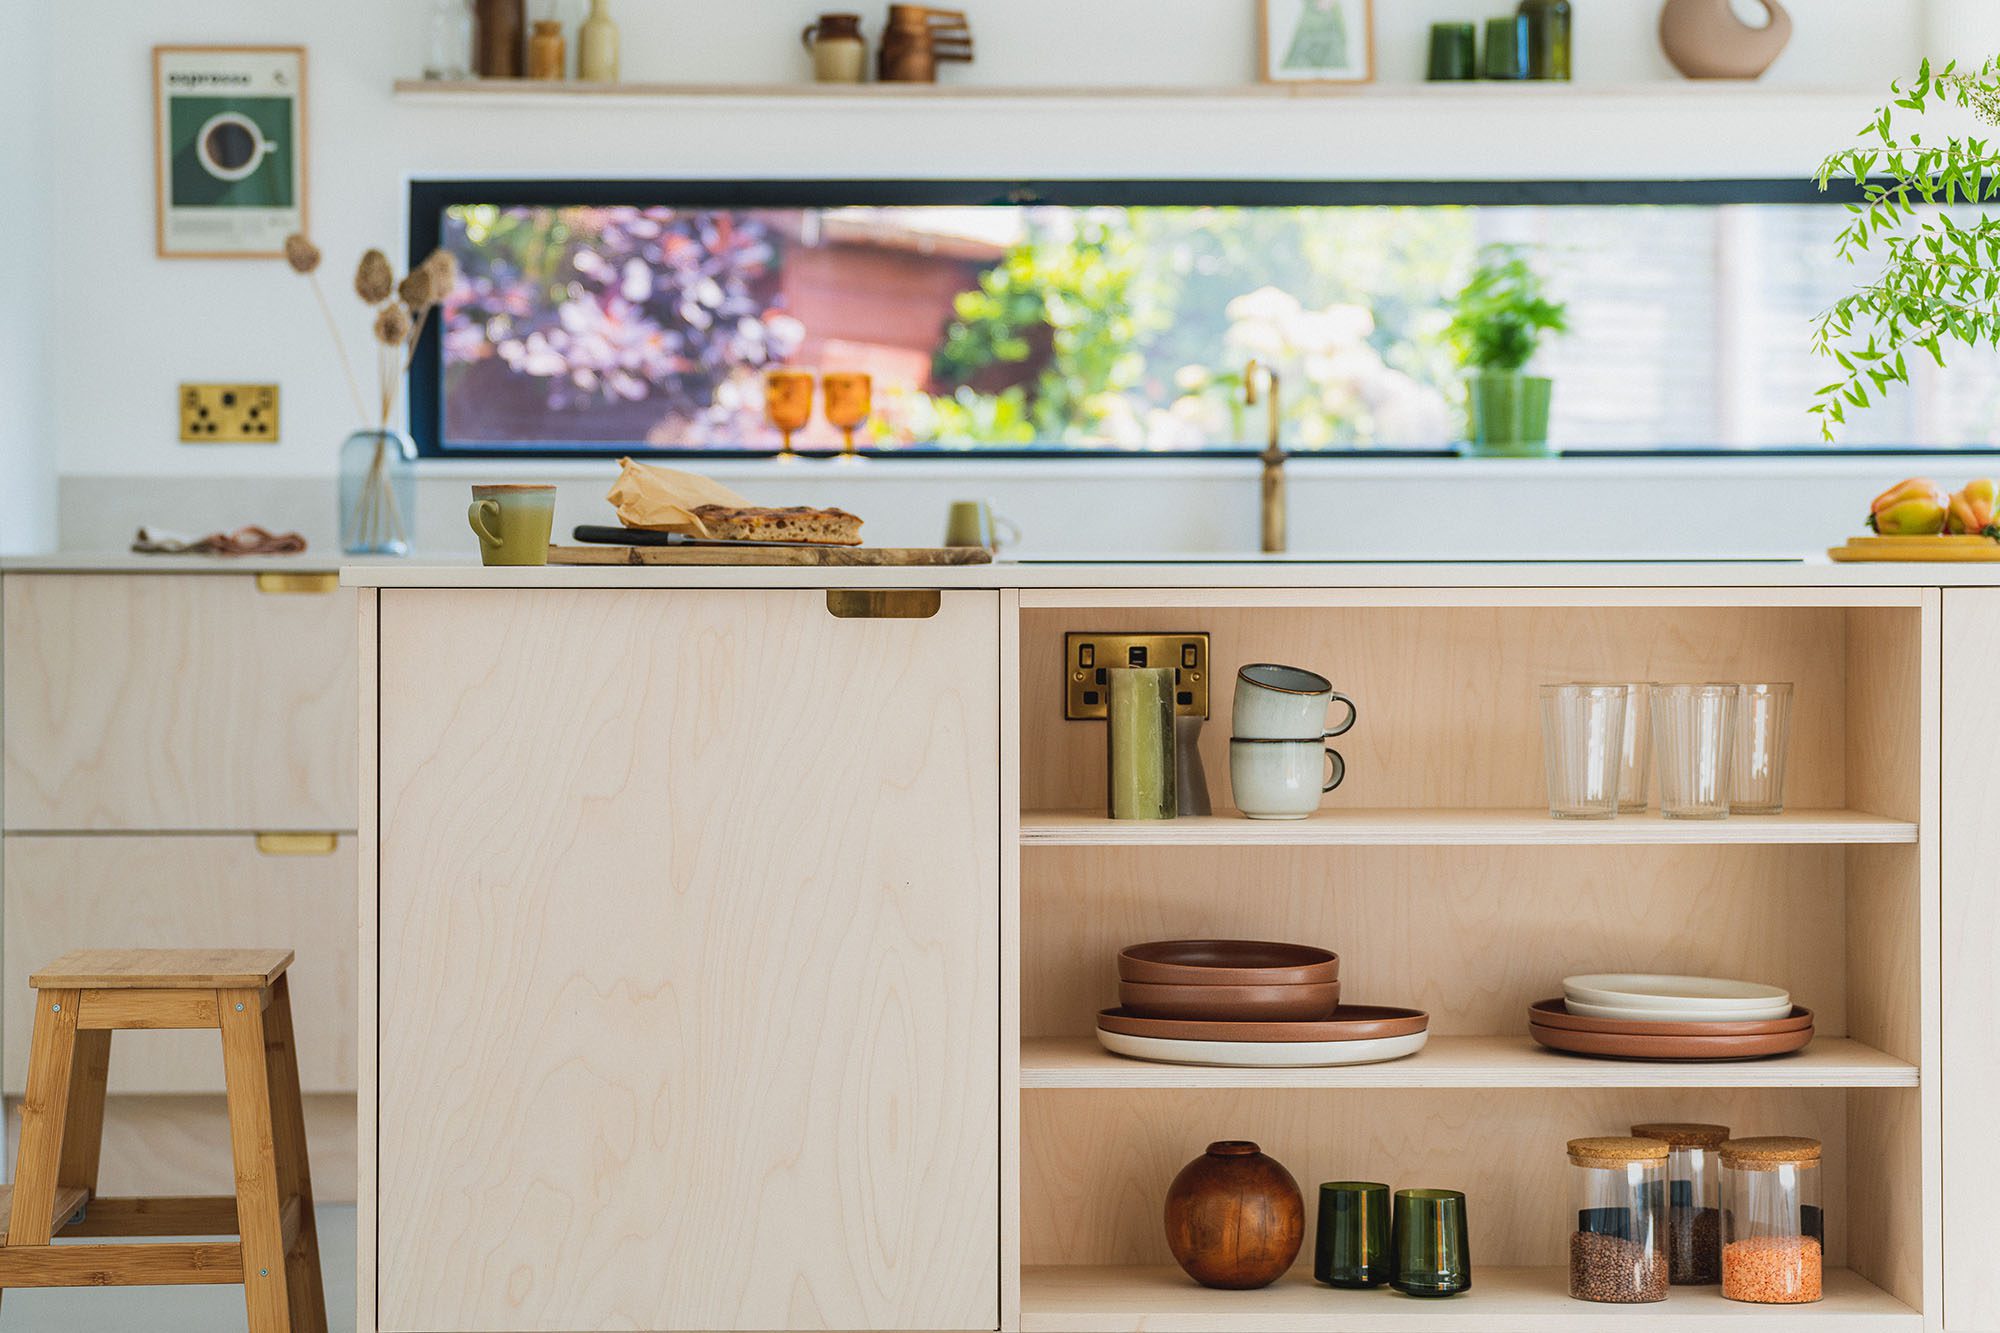 Husk's Greenhill Kitchen, featuring plywood kitchen fronts with integrated handles.